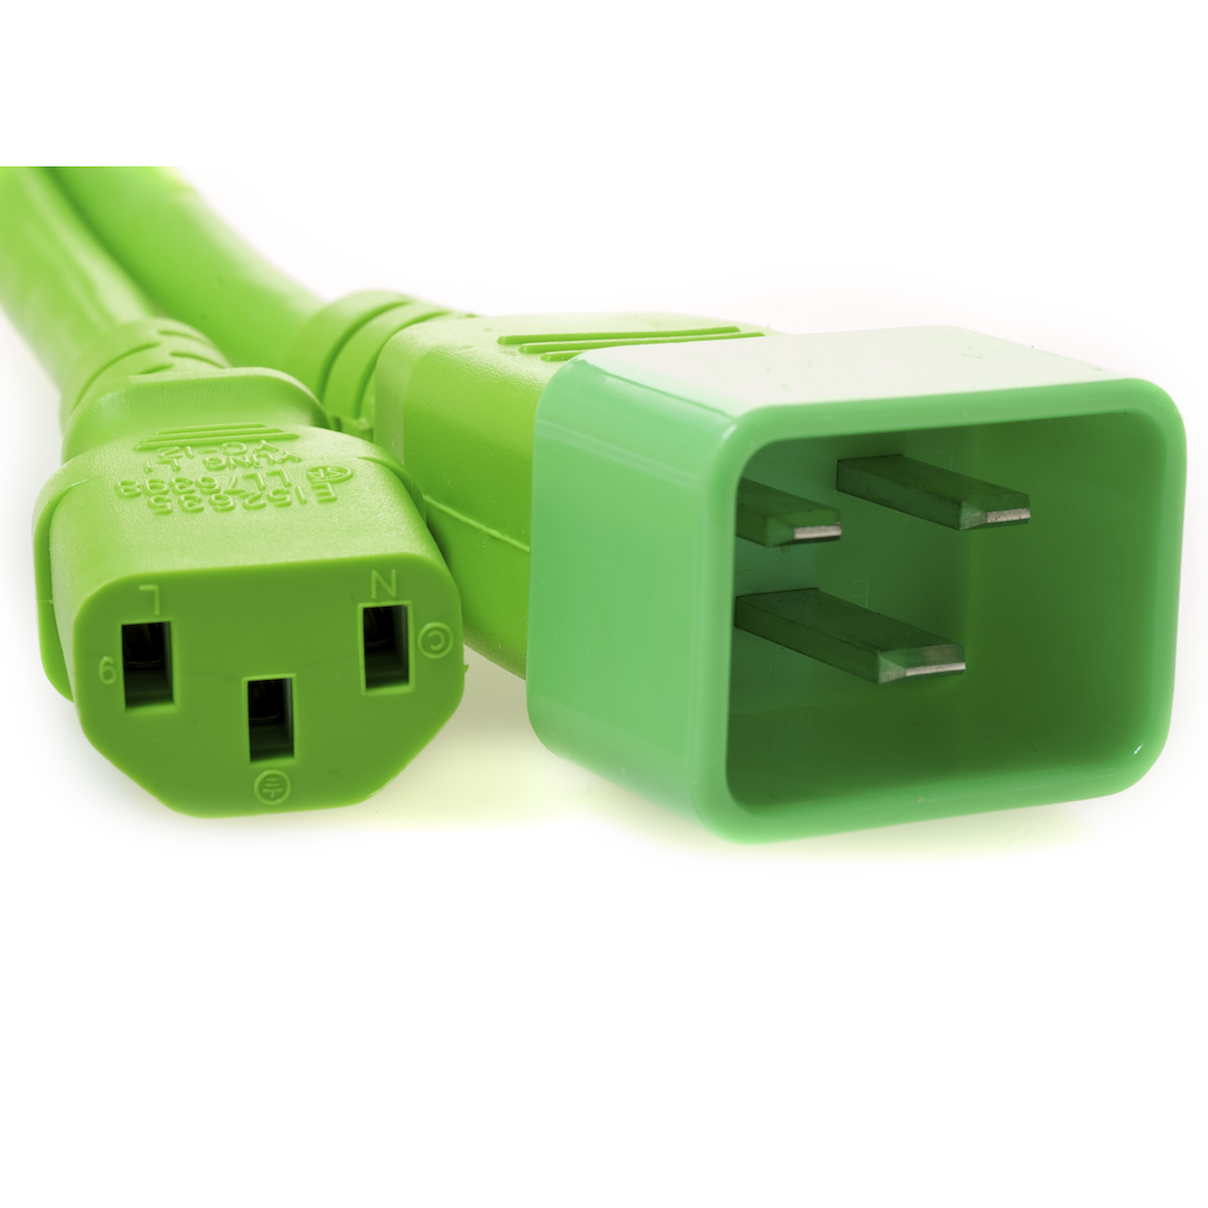 C20 Plug Male to C13 Connector Female 1 Feet 15 Amp 14/3 SJT 250v Power Cord- Green